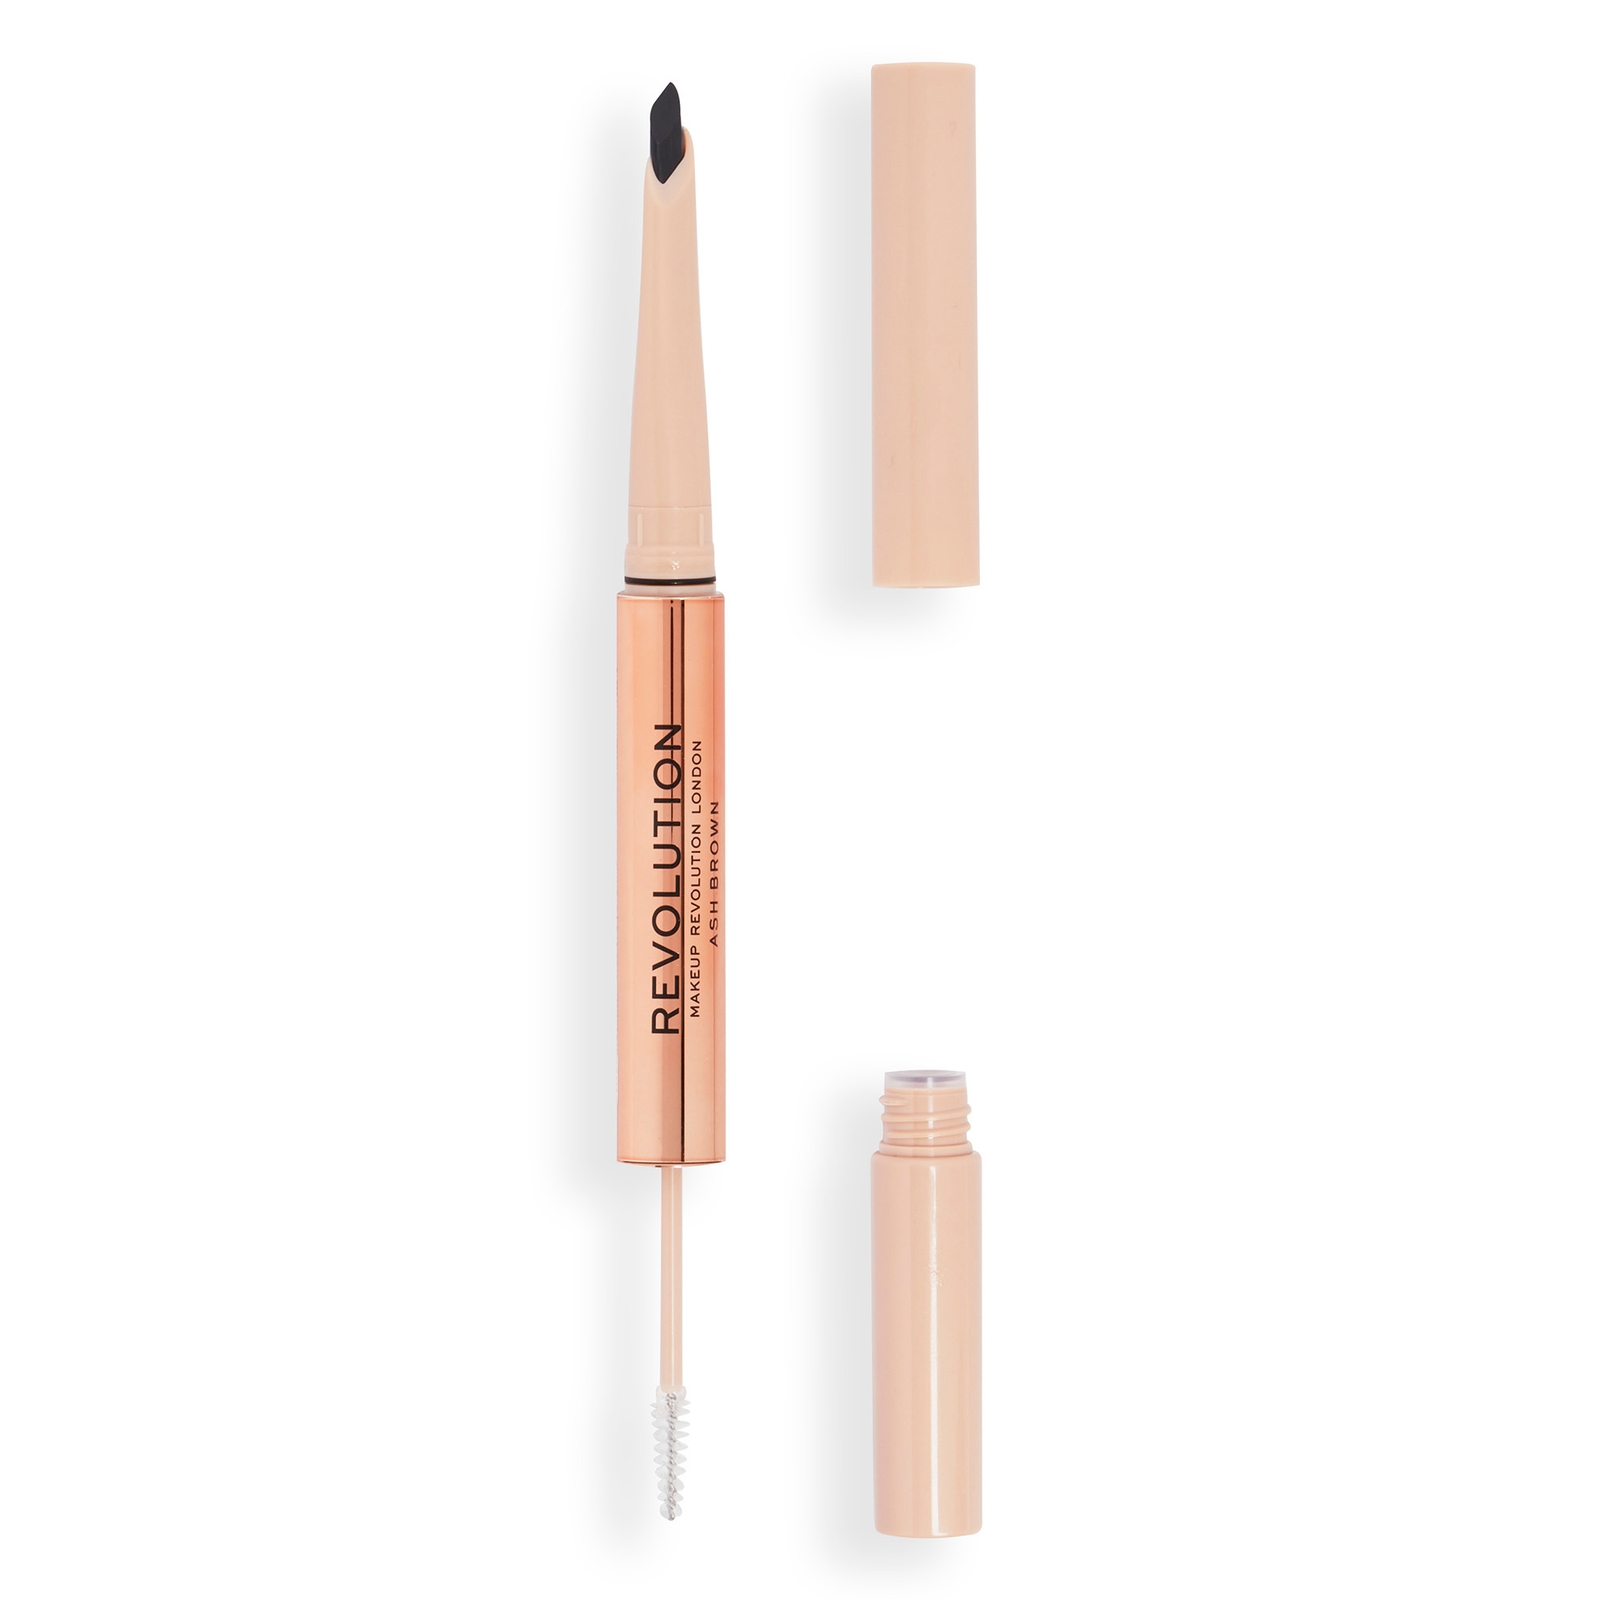 Makeup Revolution Fluffy Brow Duo Blonde - Ash Brown